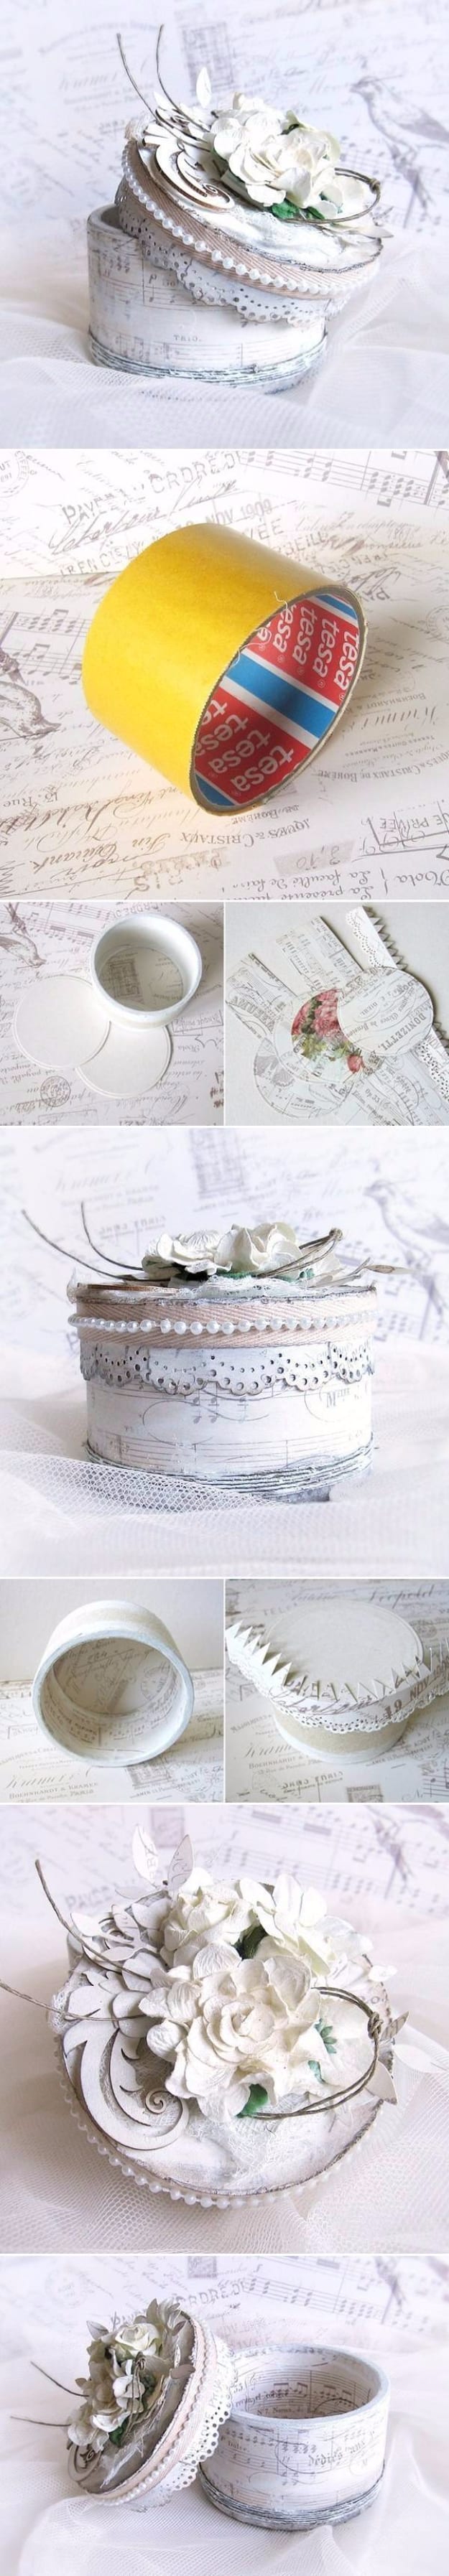 Shabby Chic Decor and Bedding Ideas - DIY Tape Roll Jewelry Box - Rustic and Romantic Vintage Bedroom, Living Room and Kitchen Country Cottage Furniture and Home Decor Ideas. Step by Step Tutorials and Instructions 